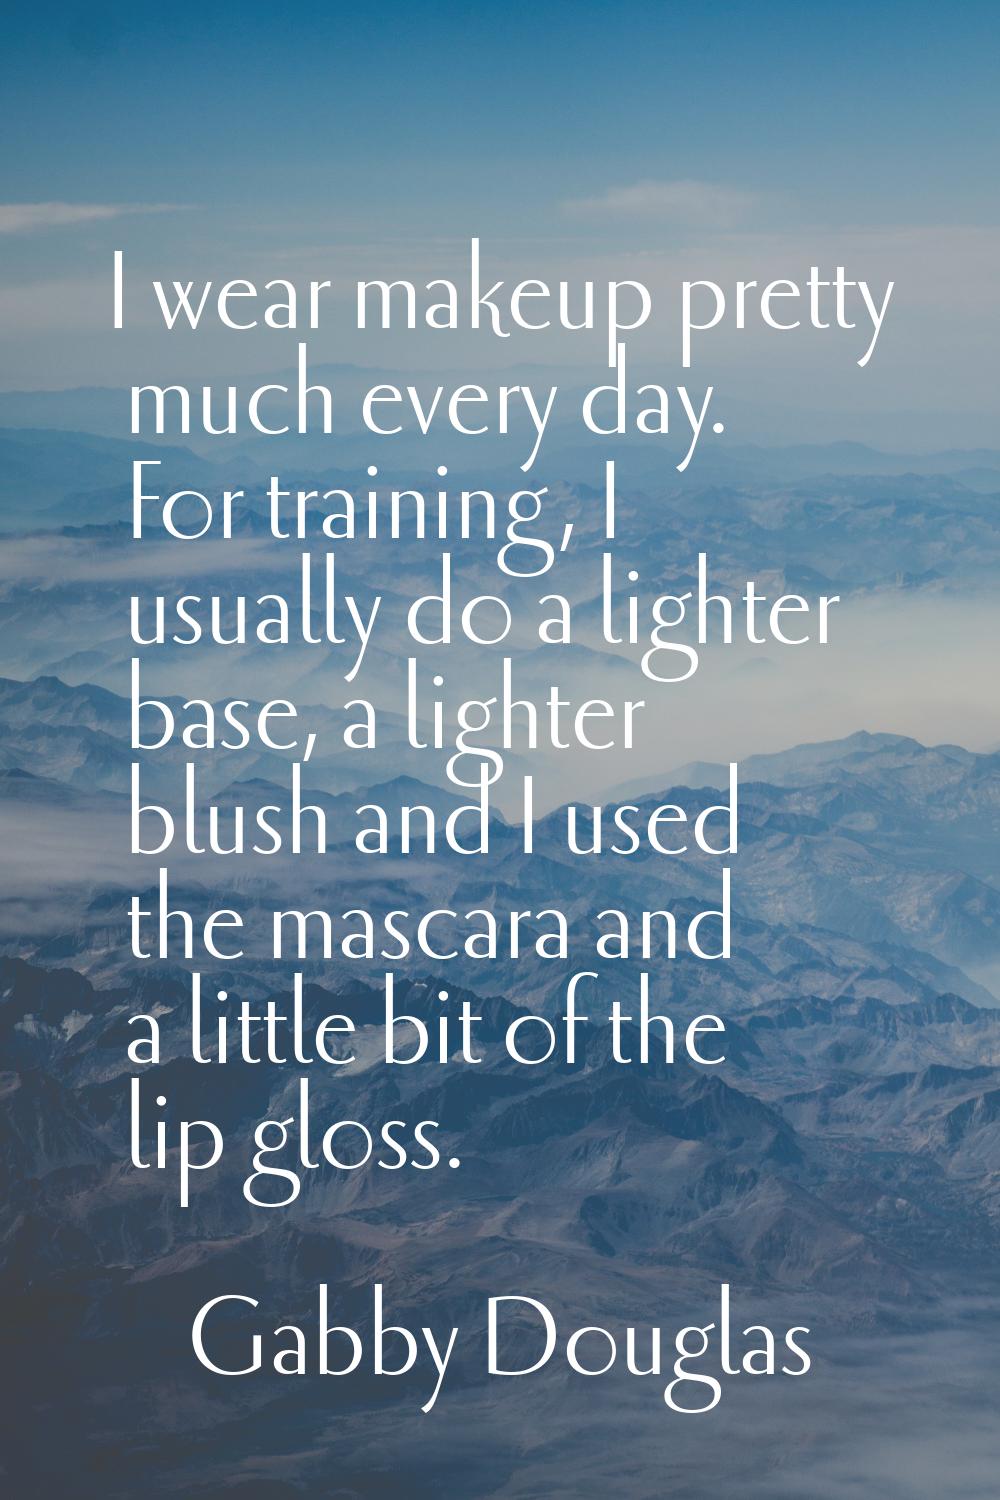 I wear makeup pretty much every day. For training, I usually do a lighter base, a lighter blush and